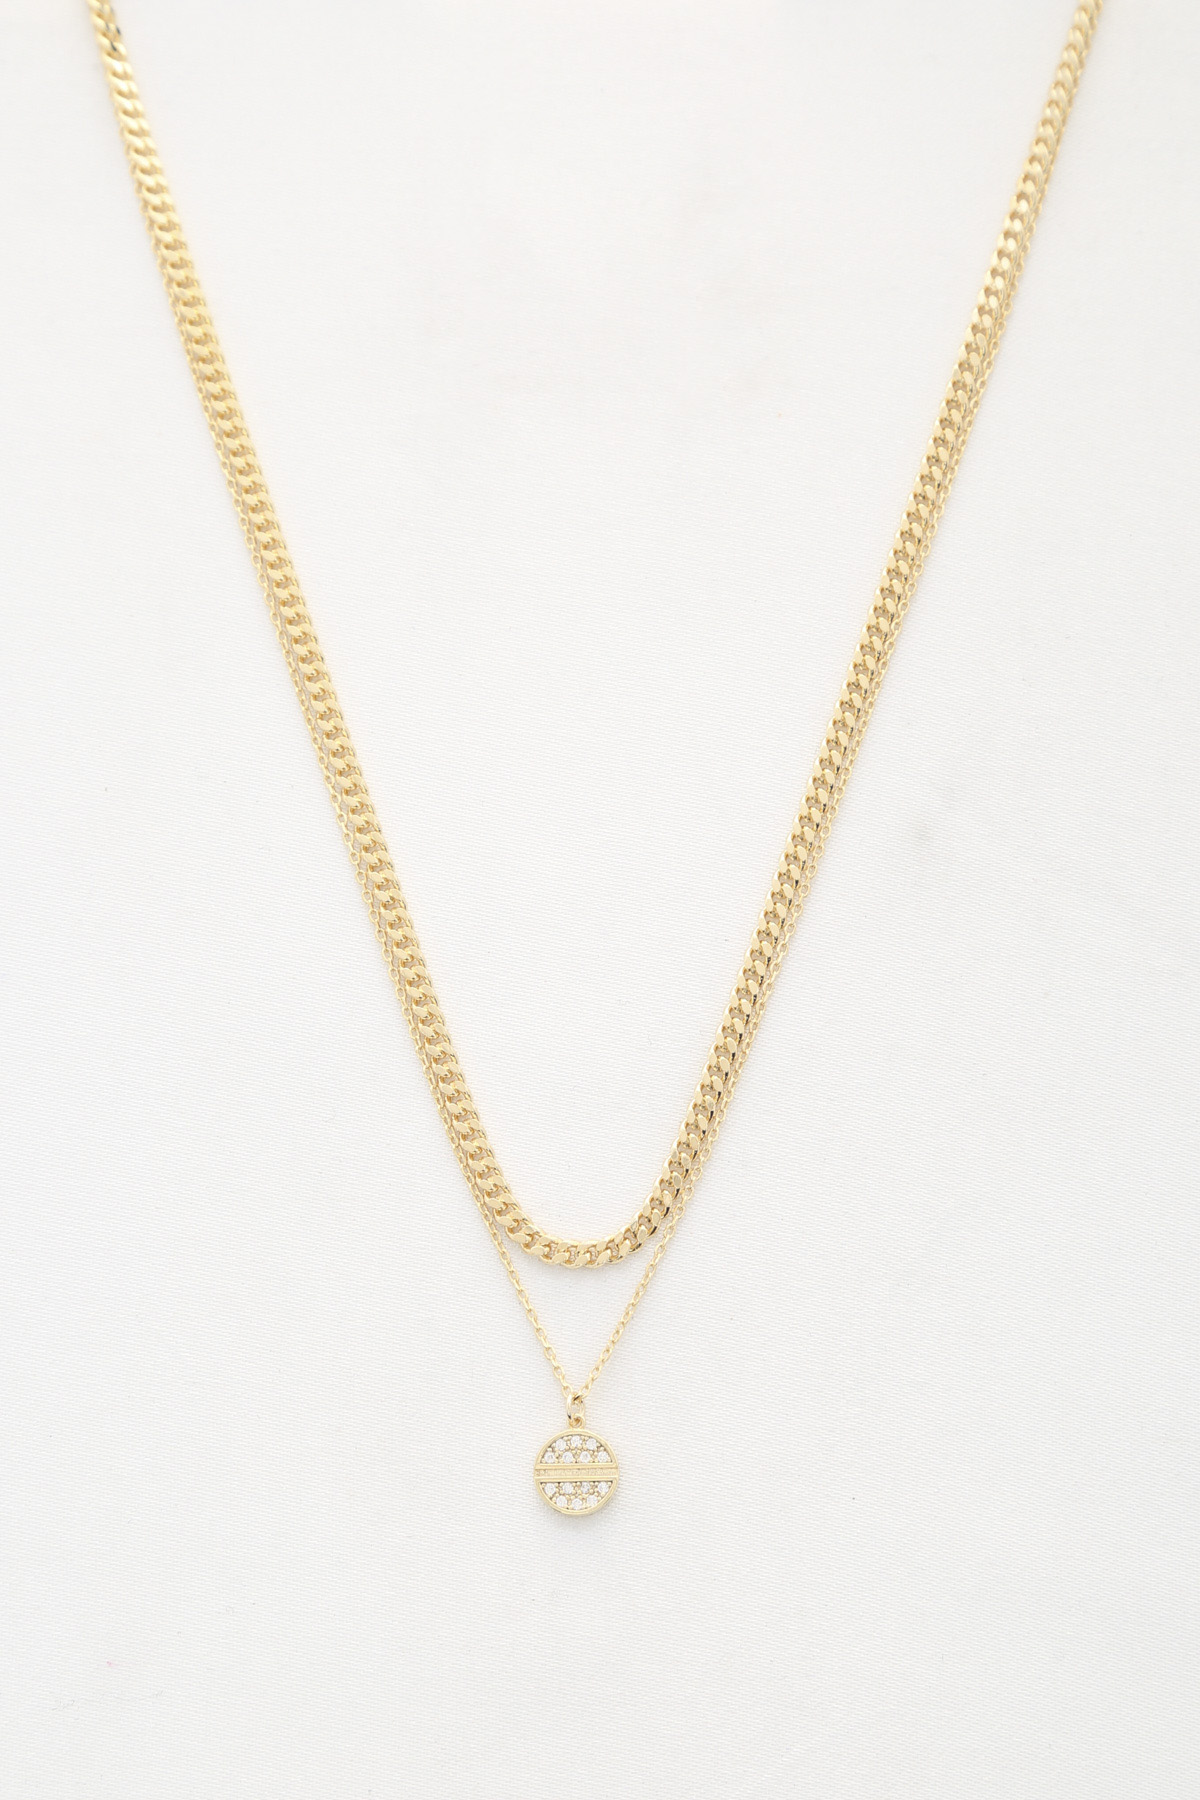 SODAJO ROUND CHARM DAINTY CURB LINK LAYERED NECKLACE